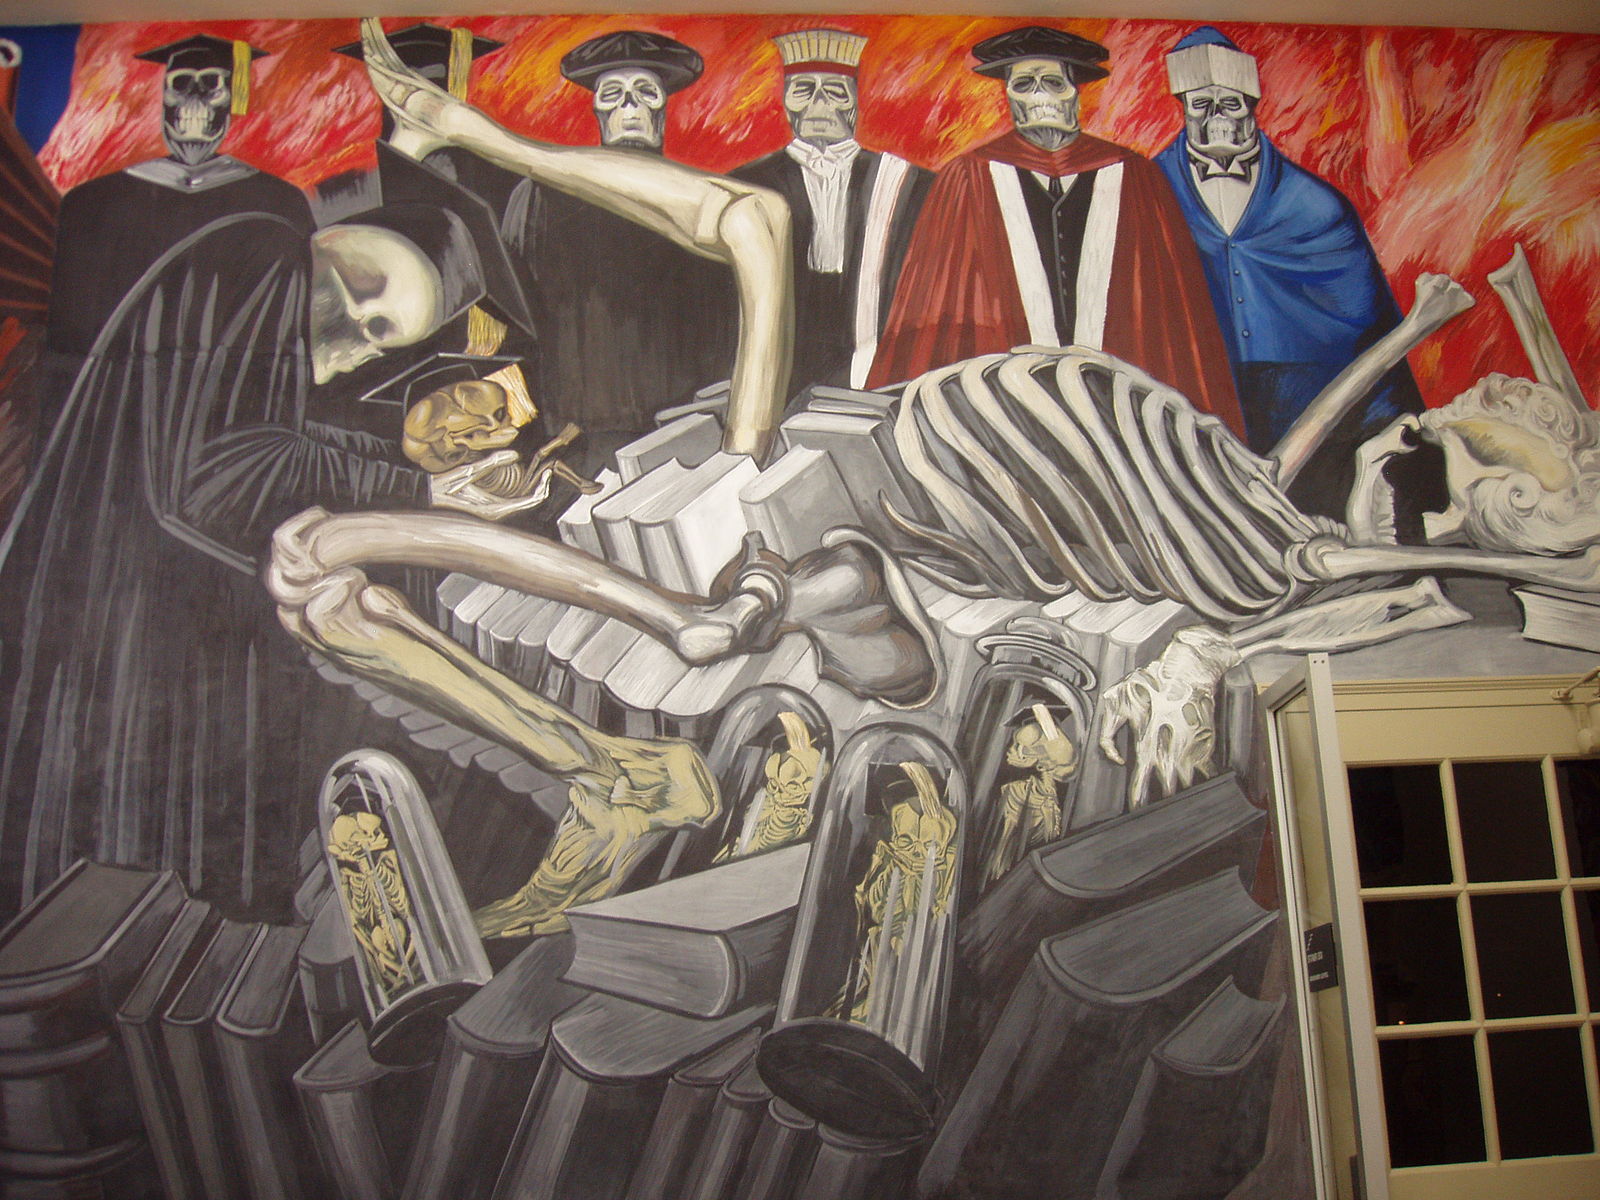 A mural with a large skeleton surrounded by other skeletons